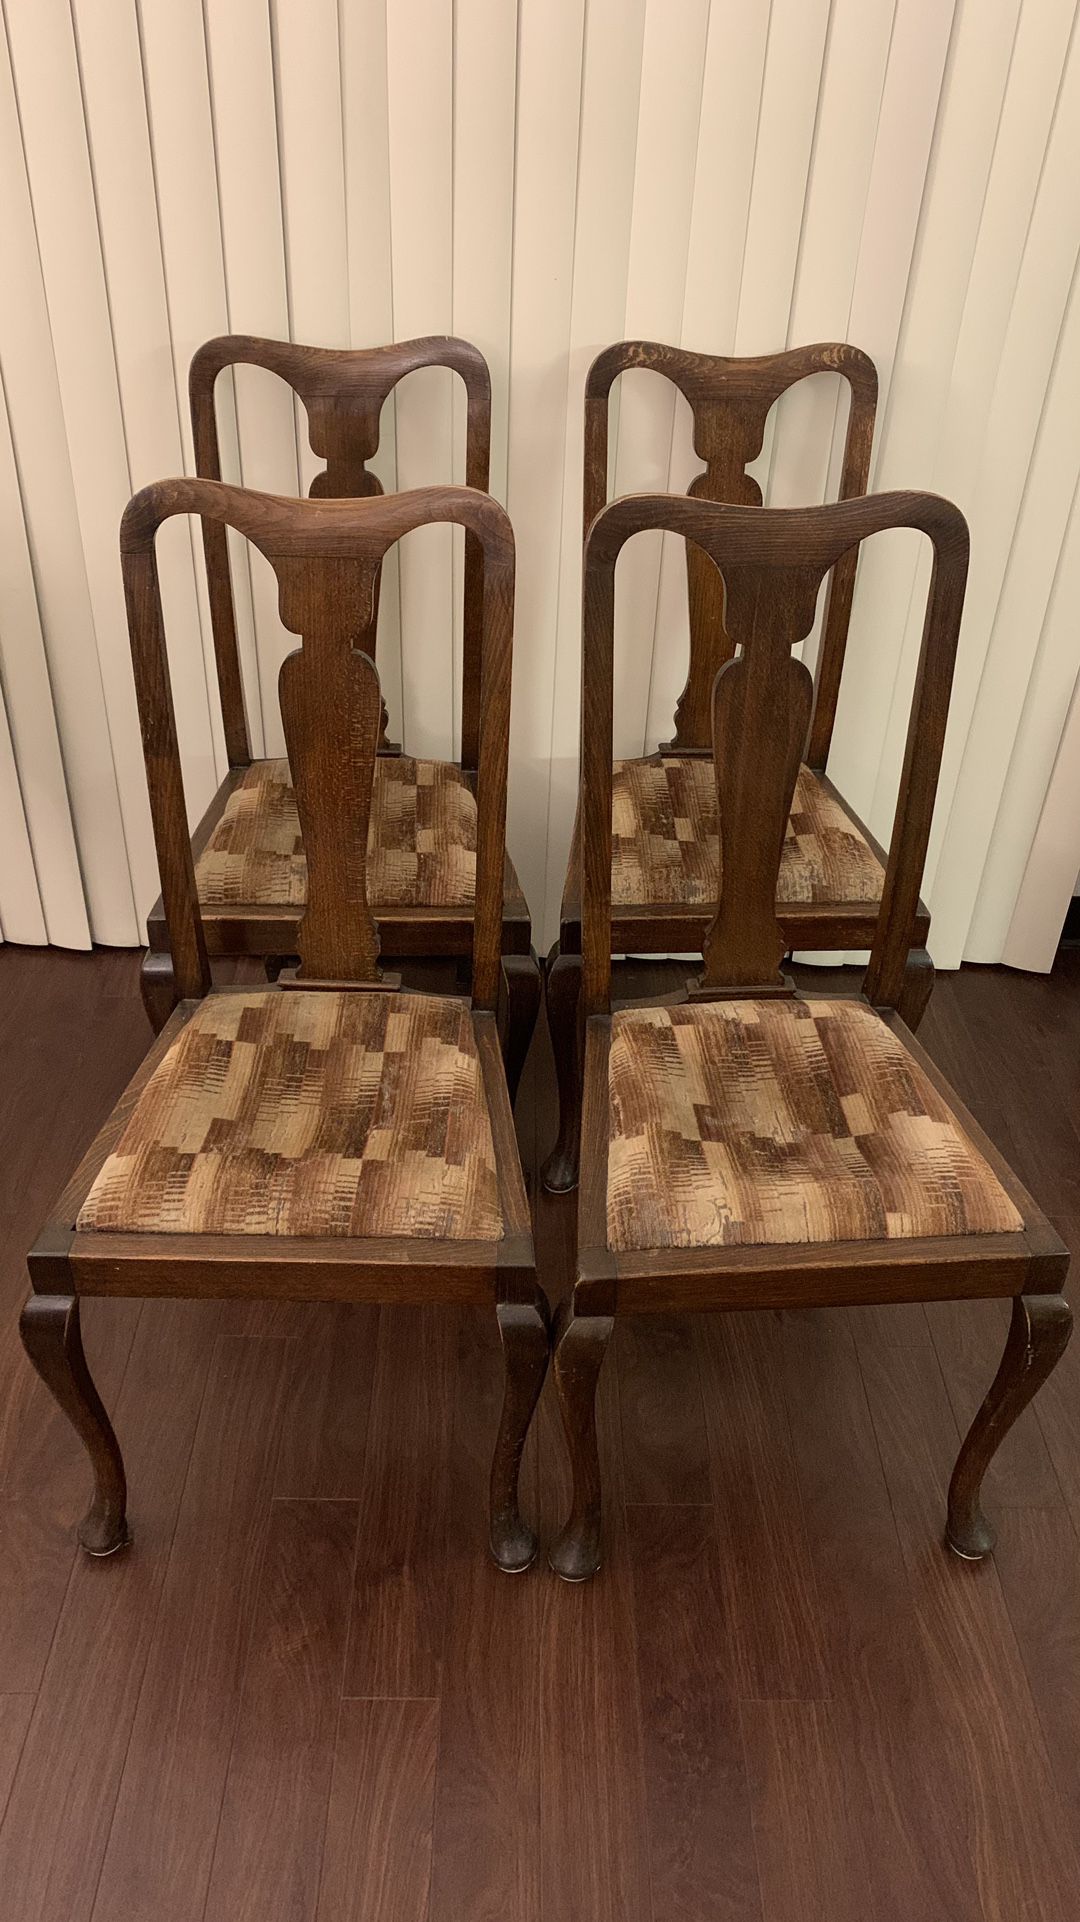 Antique Chairs made in Britain ×4